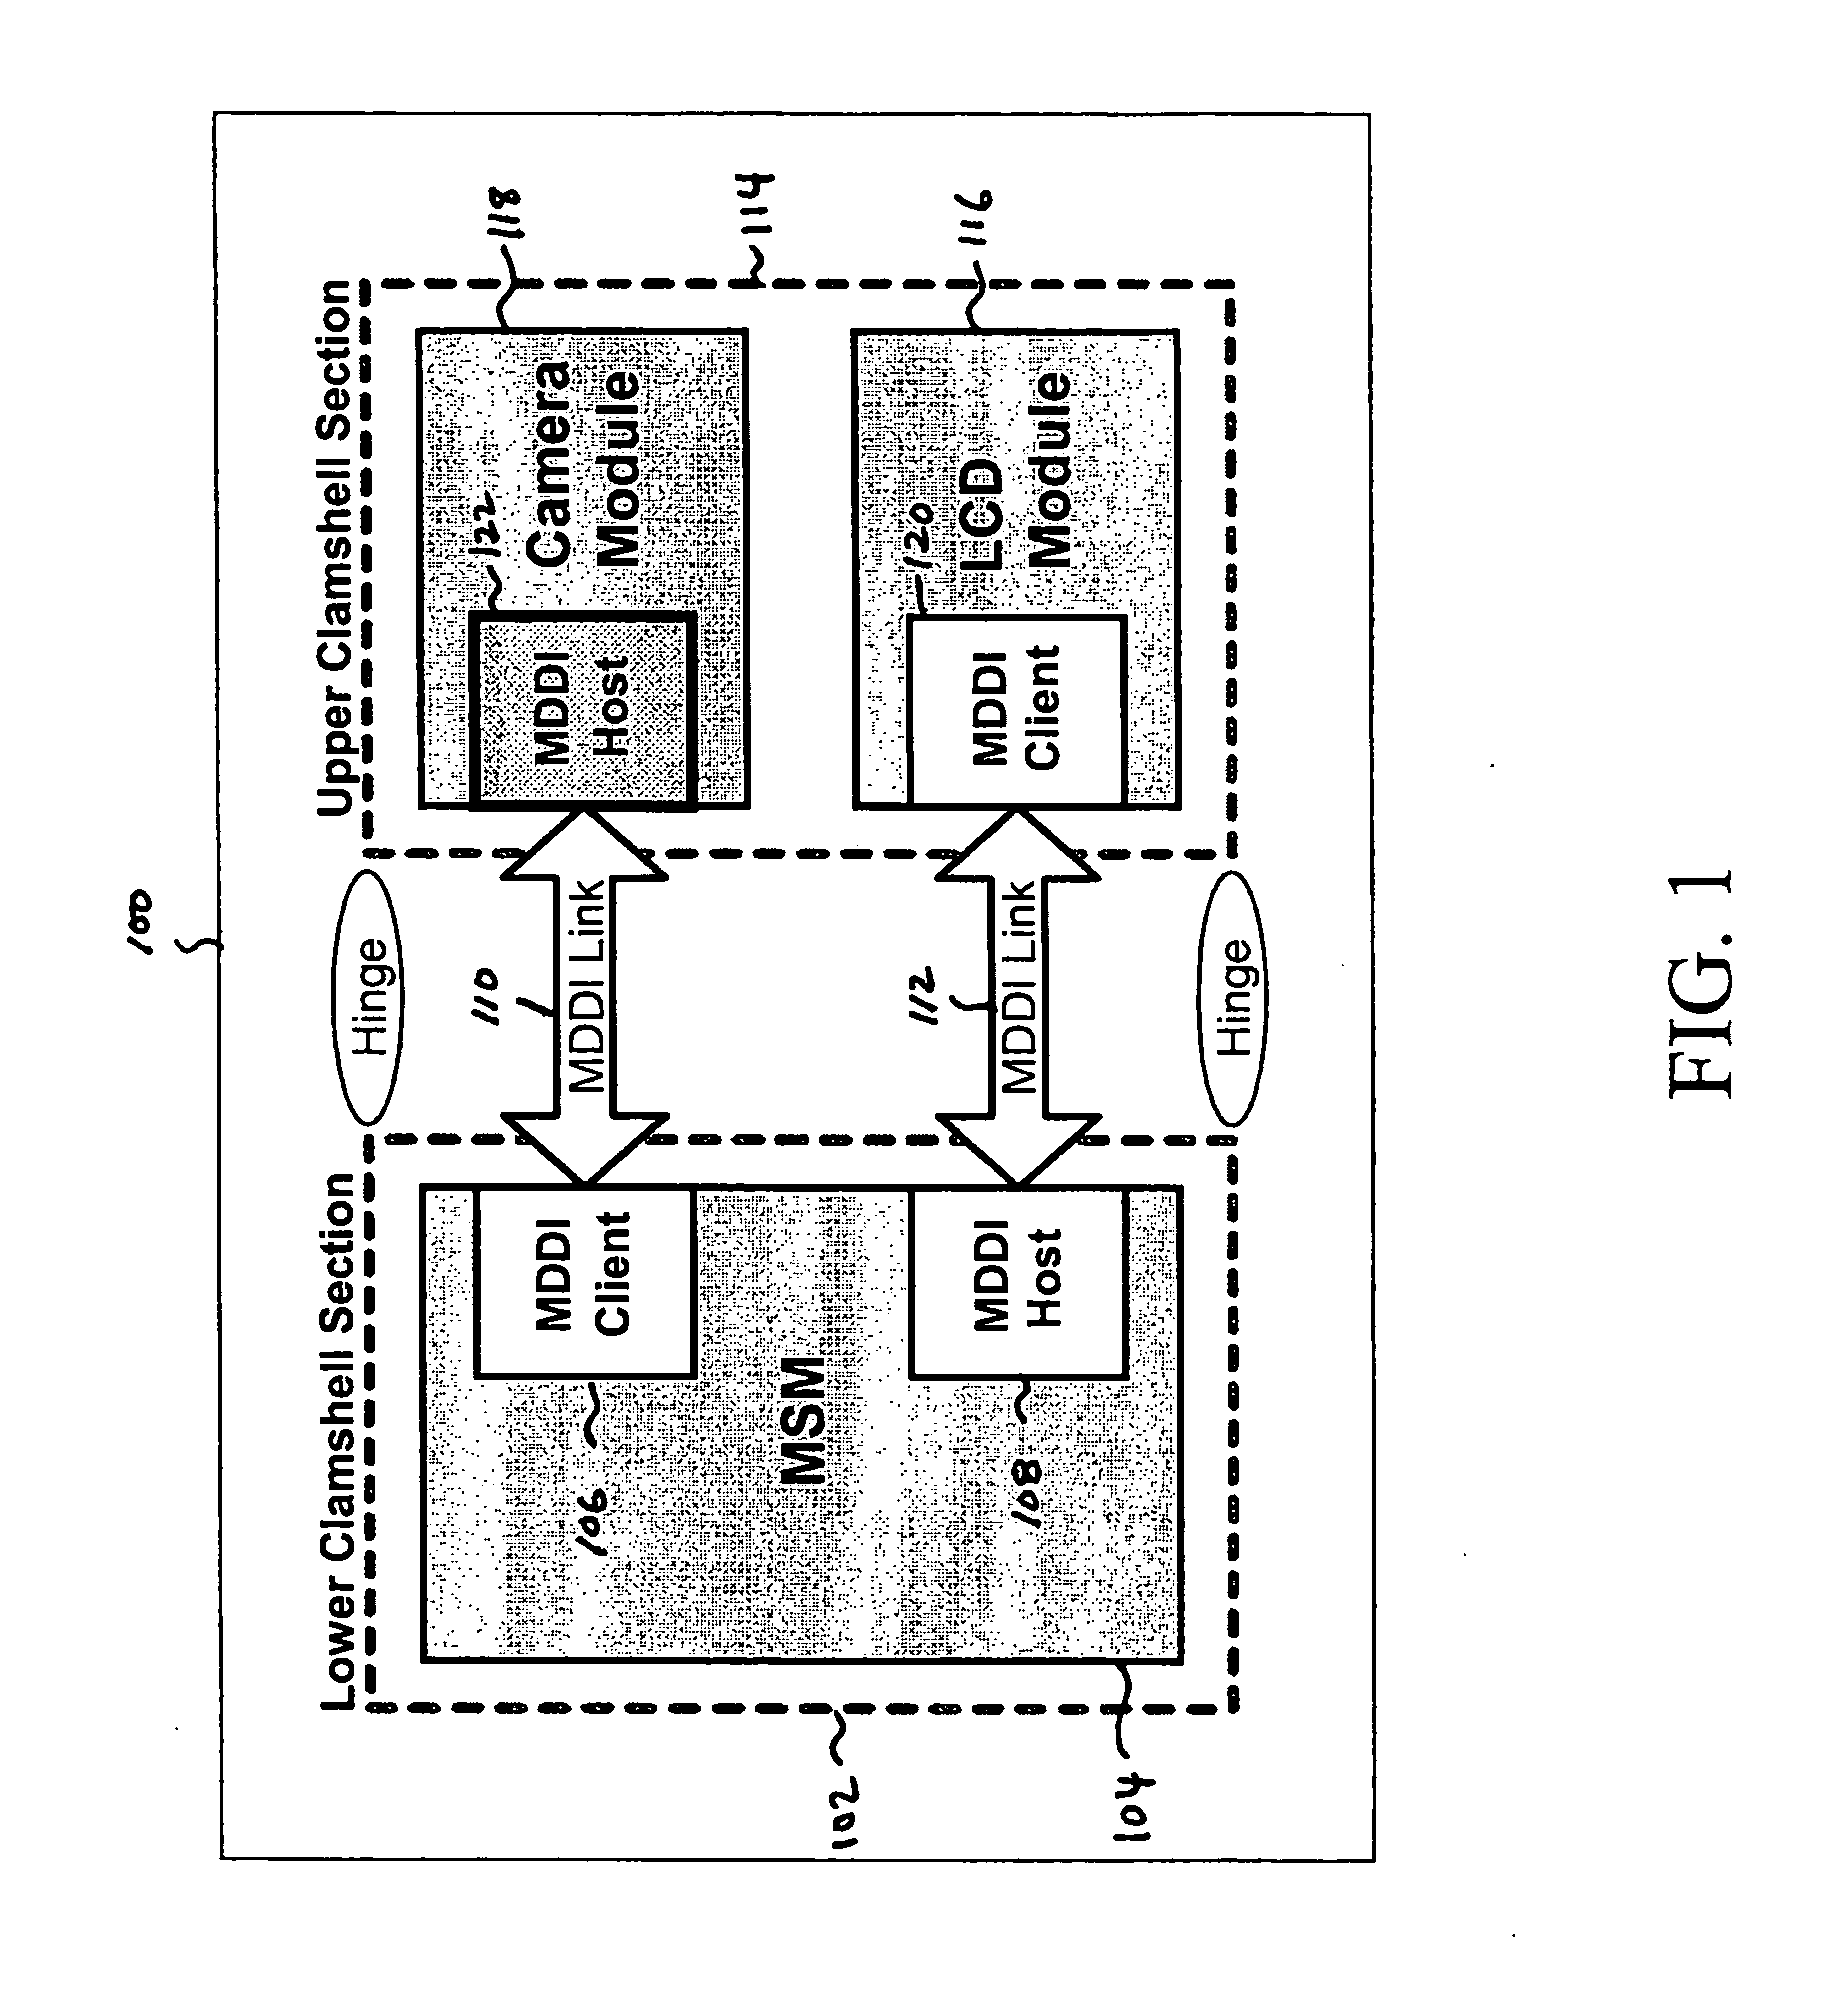 Methods and systems for synchronous execution of commands across a communication link